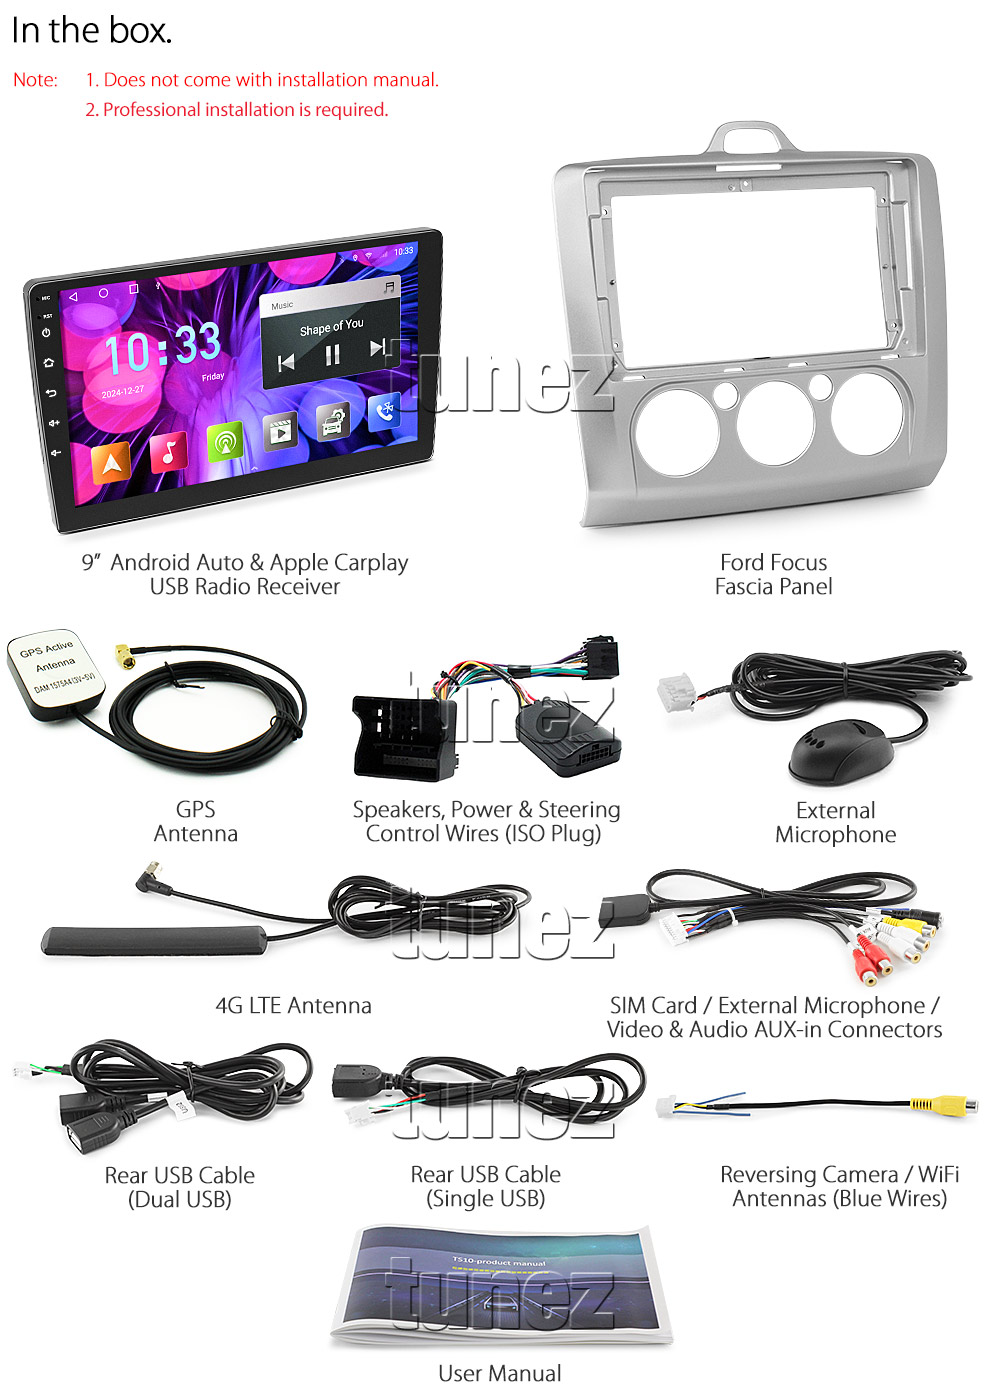 FF31AND GPS Aftermarket Ford Focus 2nd Second Generation Gen Europe European Australia LS ST LV Series MK2 Chassis Year 2005 2006 2007 2008 2009 2010 2011 capacitive 9 inches touchscreen Universal Double DIN Latest Australia UK European USA Original CarPlay Android Auto 10 Car USB player radio stereo 4G LTE WiFi head unit details Aftermarket External and Internal Microphone Bluetooth Europe Sat Nav Navi Plug and Play ISO Plug Wiring Harness Matching Fascia Kit Facia Free Reversing Camera Album Art ID3 Tag RMVB MP3 MP4 AVI MKV Full High Definition FHD 1080p DAB+ Digital Radio DAB + Connects2 CTSIZ001.2